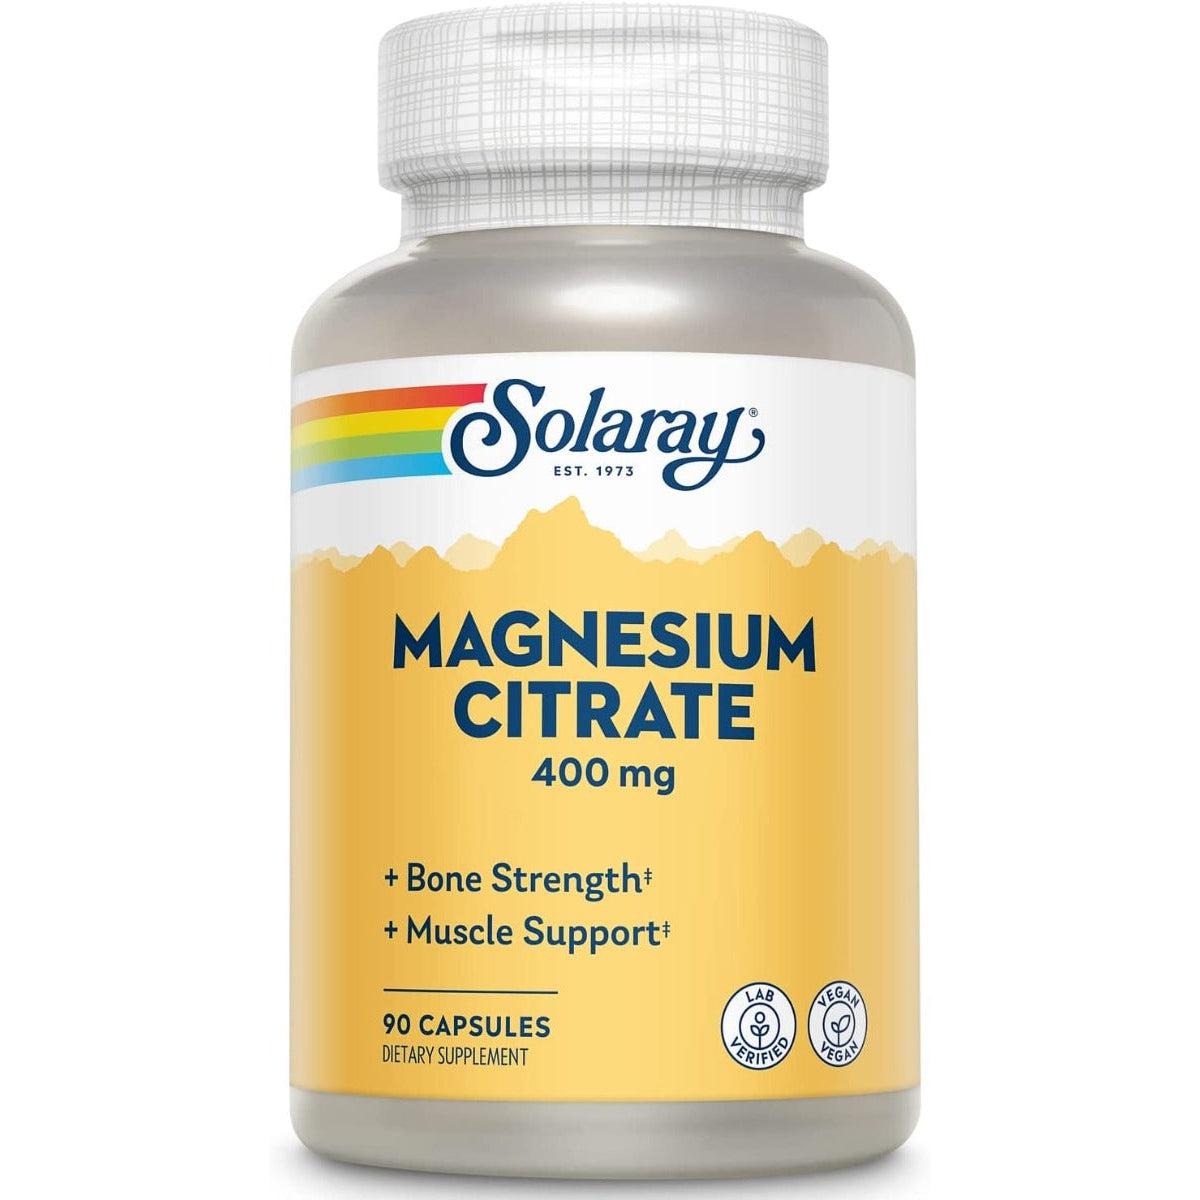 Solaray Magnesium Citrate 400mg 90 Vegetable Capsules